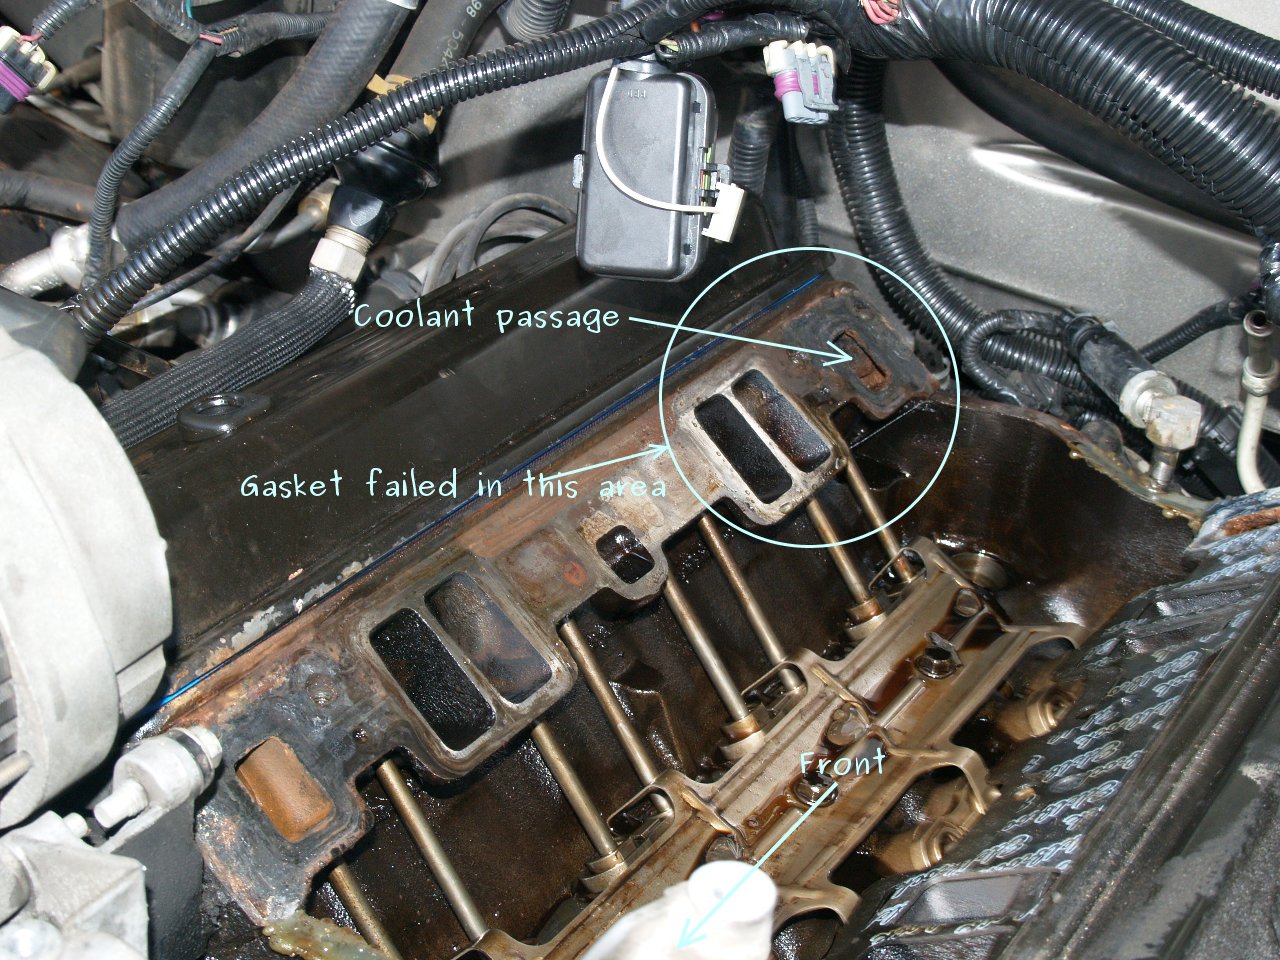 See P113C in engine